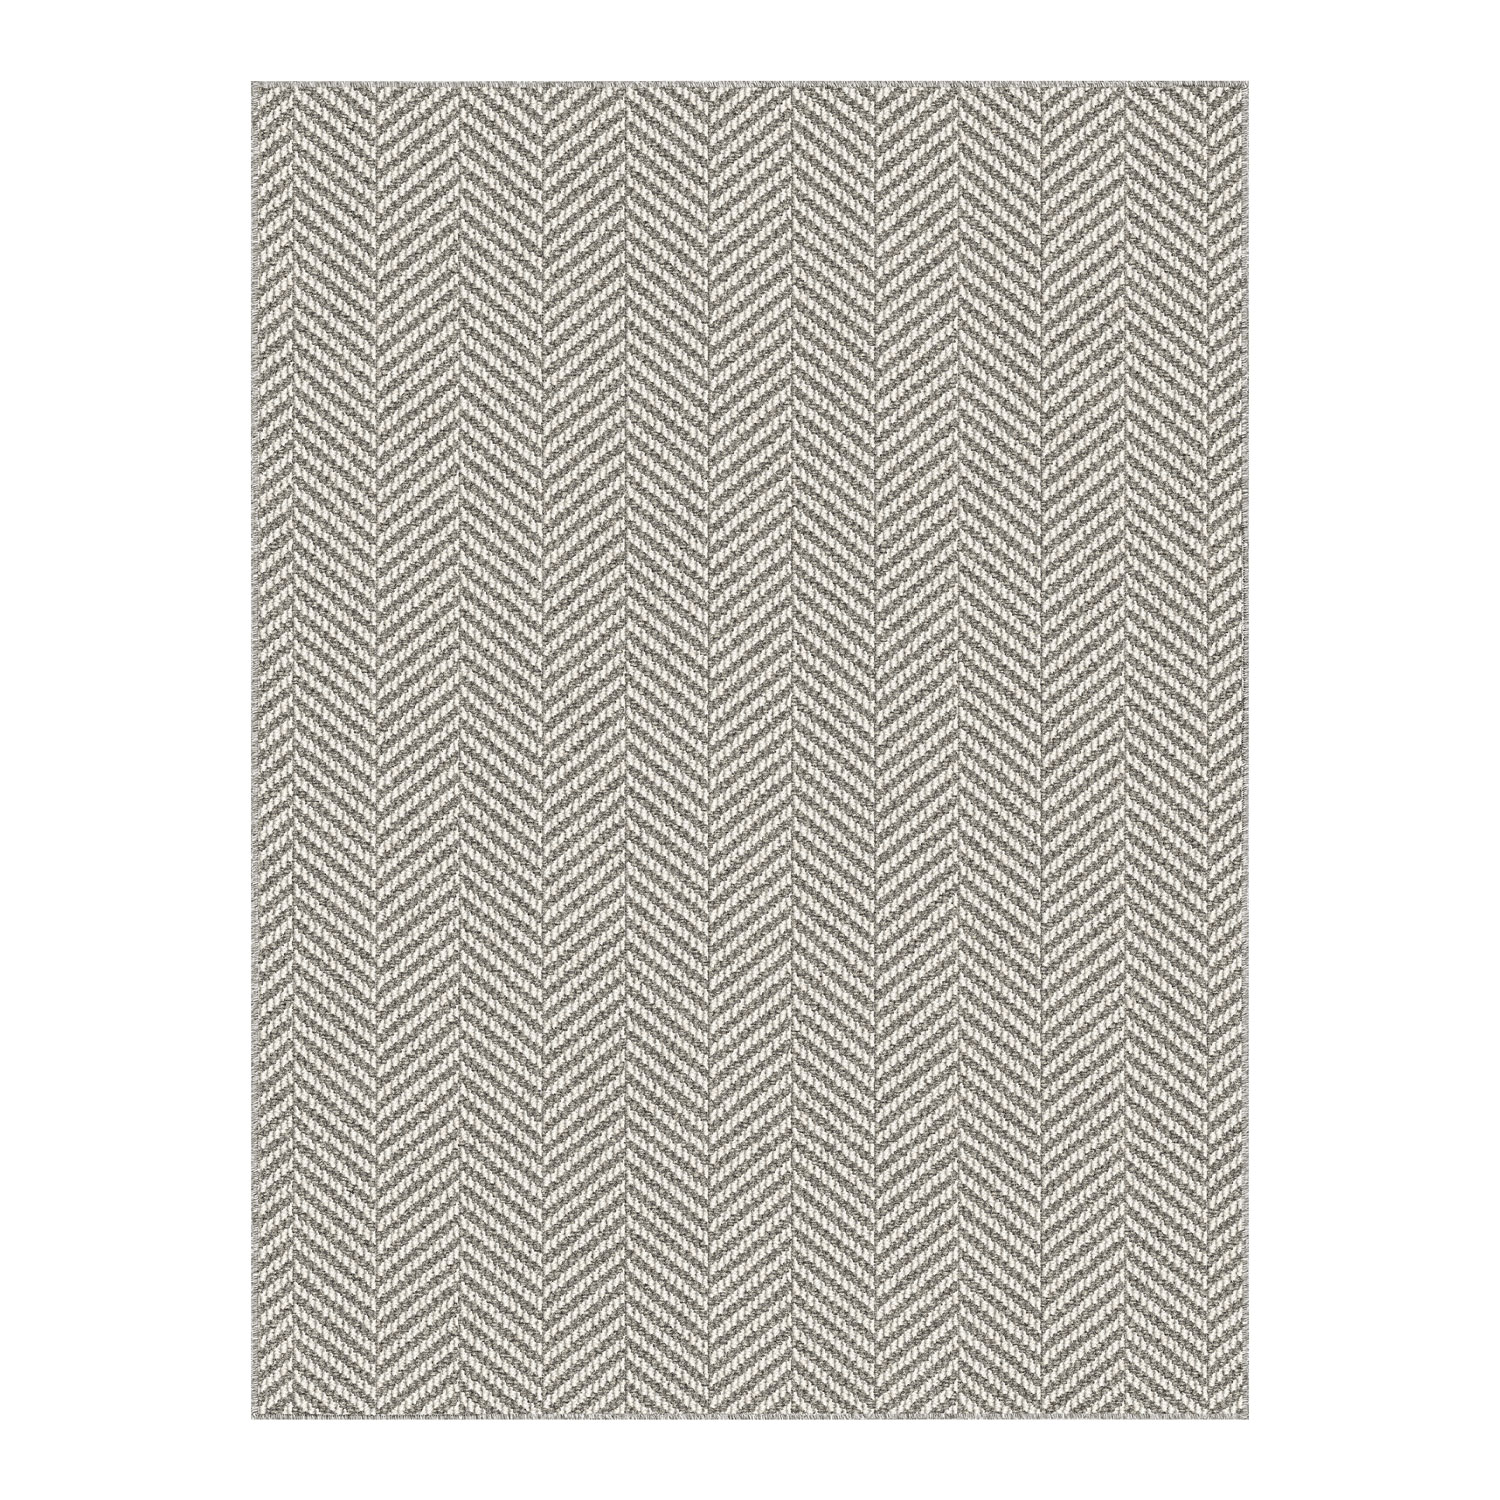 Collection TRIDENT, tapis, gris, 3'x4'